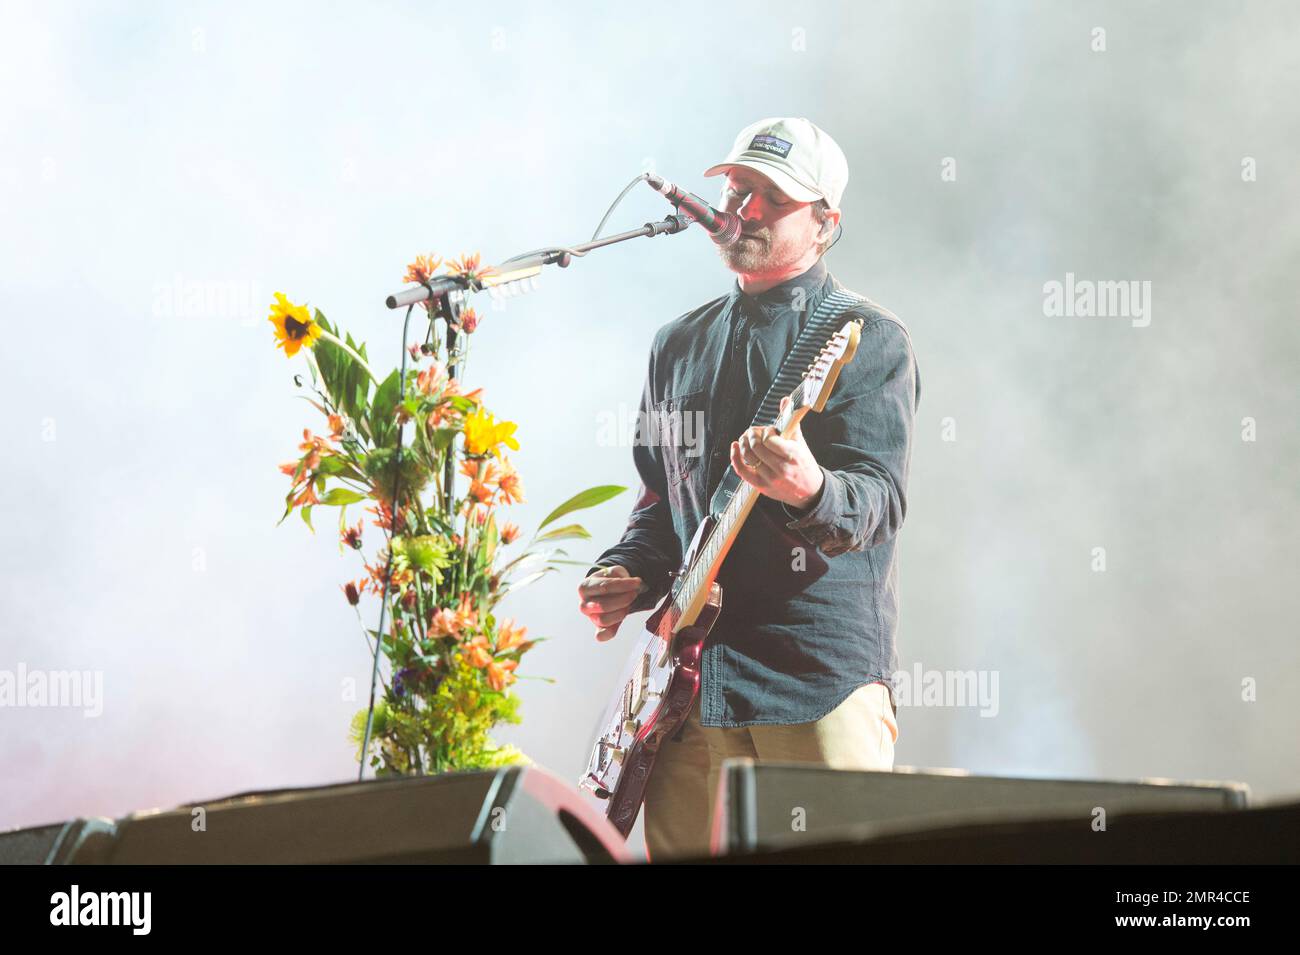 Austin, Texas, USA. 2nd Oct, 2015. Singer and guitarist JESSE LACEY of Brand  New performs live at the Austin City Limits music festival within Zilker  Park in Austin, Texas Credit: Daniel DeSlover/ZUMA